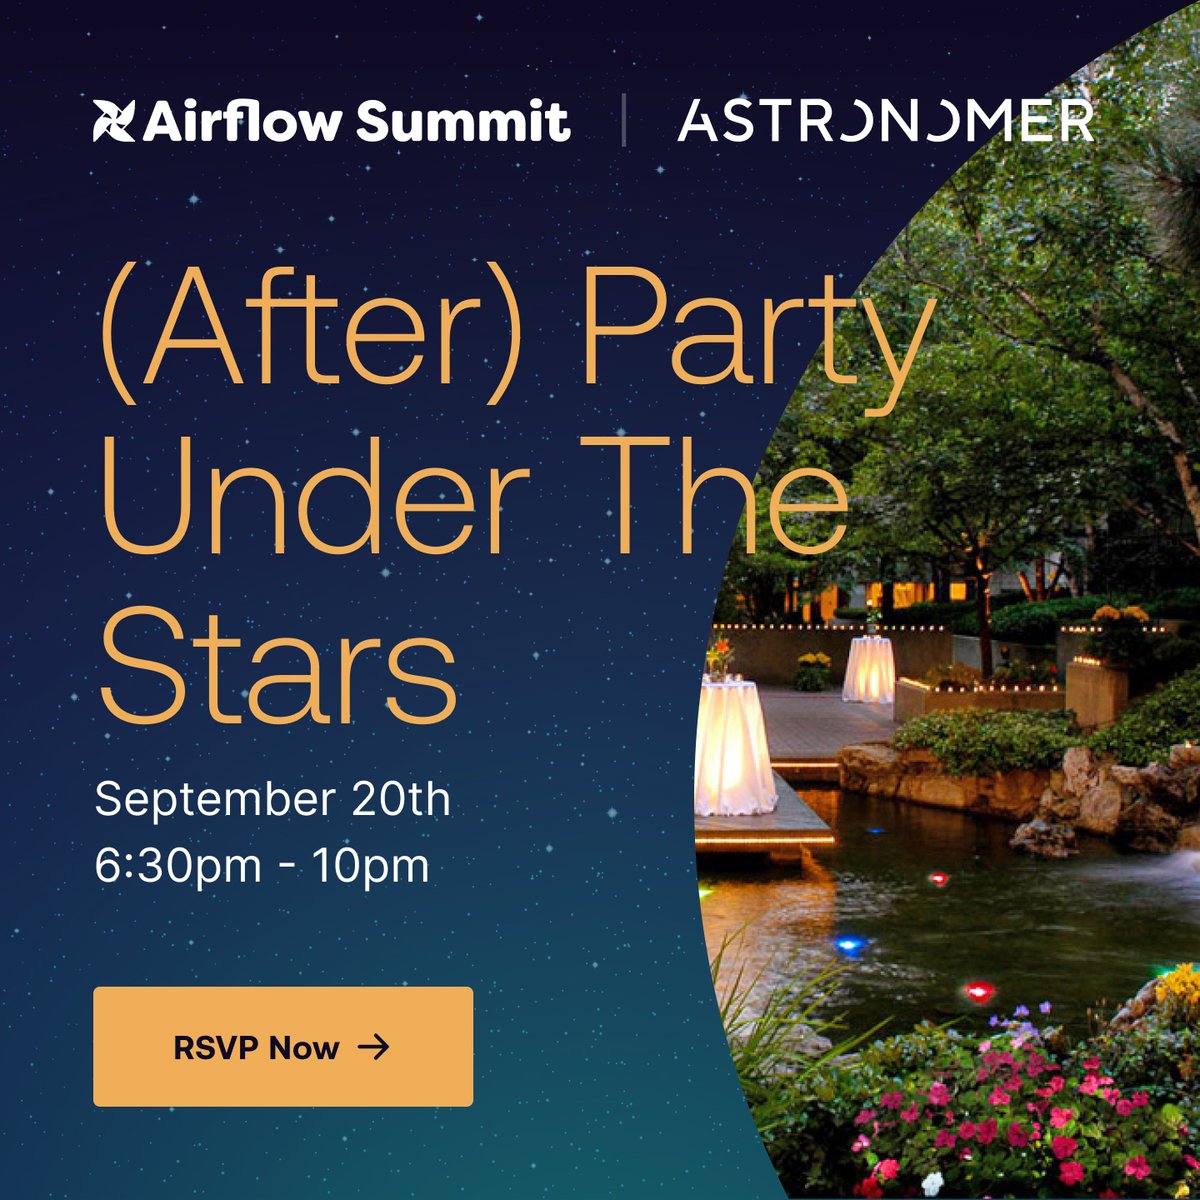 🔥 Be our guest at the hottest @AirflowSummit After Party. 

Get ready to groove to the live cosmic beats 🎶 of @switchbeatmusic, indulge in appetizers and drinks 🥃, and let the good times roll! 💃🕺 

RSVP: bit.ly/3OklA0p

#AirflowSummit2023 #ApacheAirflow #Airflow